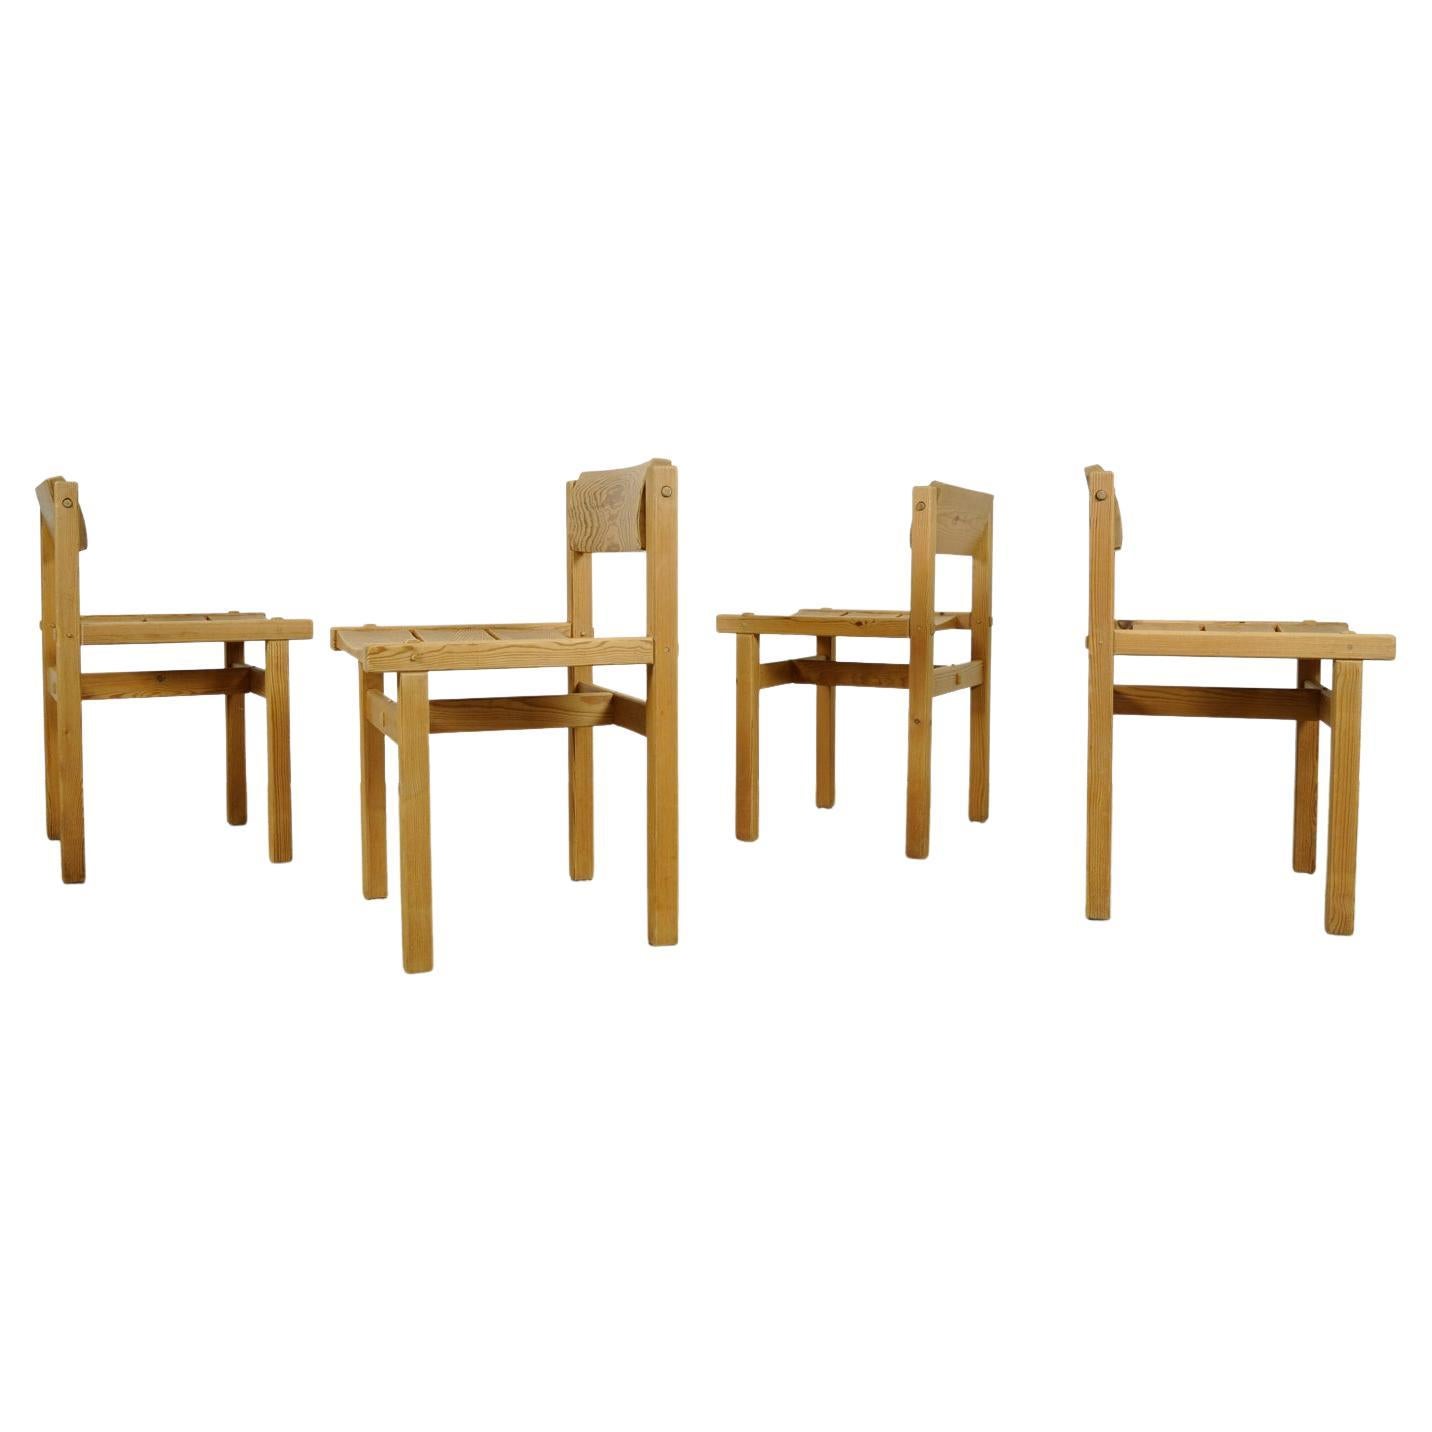 Trybo pine dining chairs (4) by Edvin Helseth for Stange Bruk, Norway 1960s For Sale